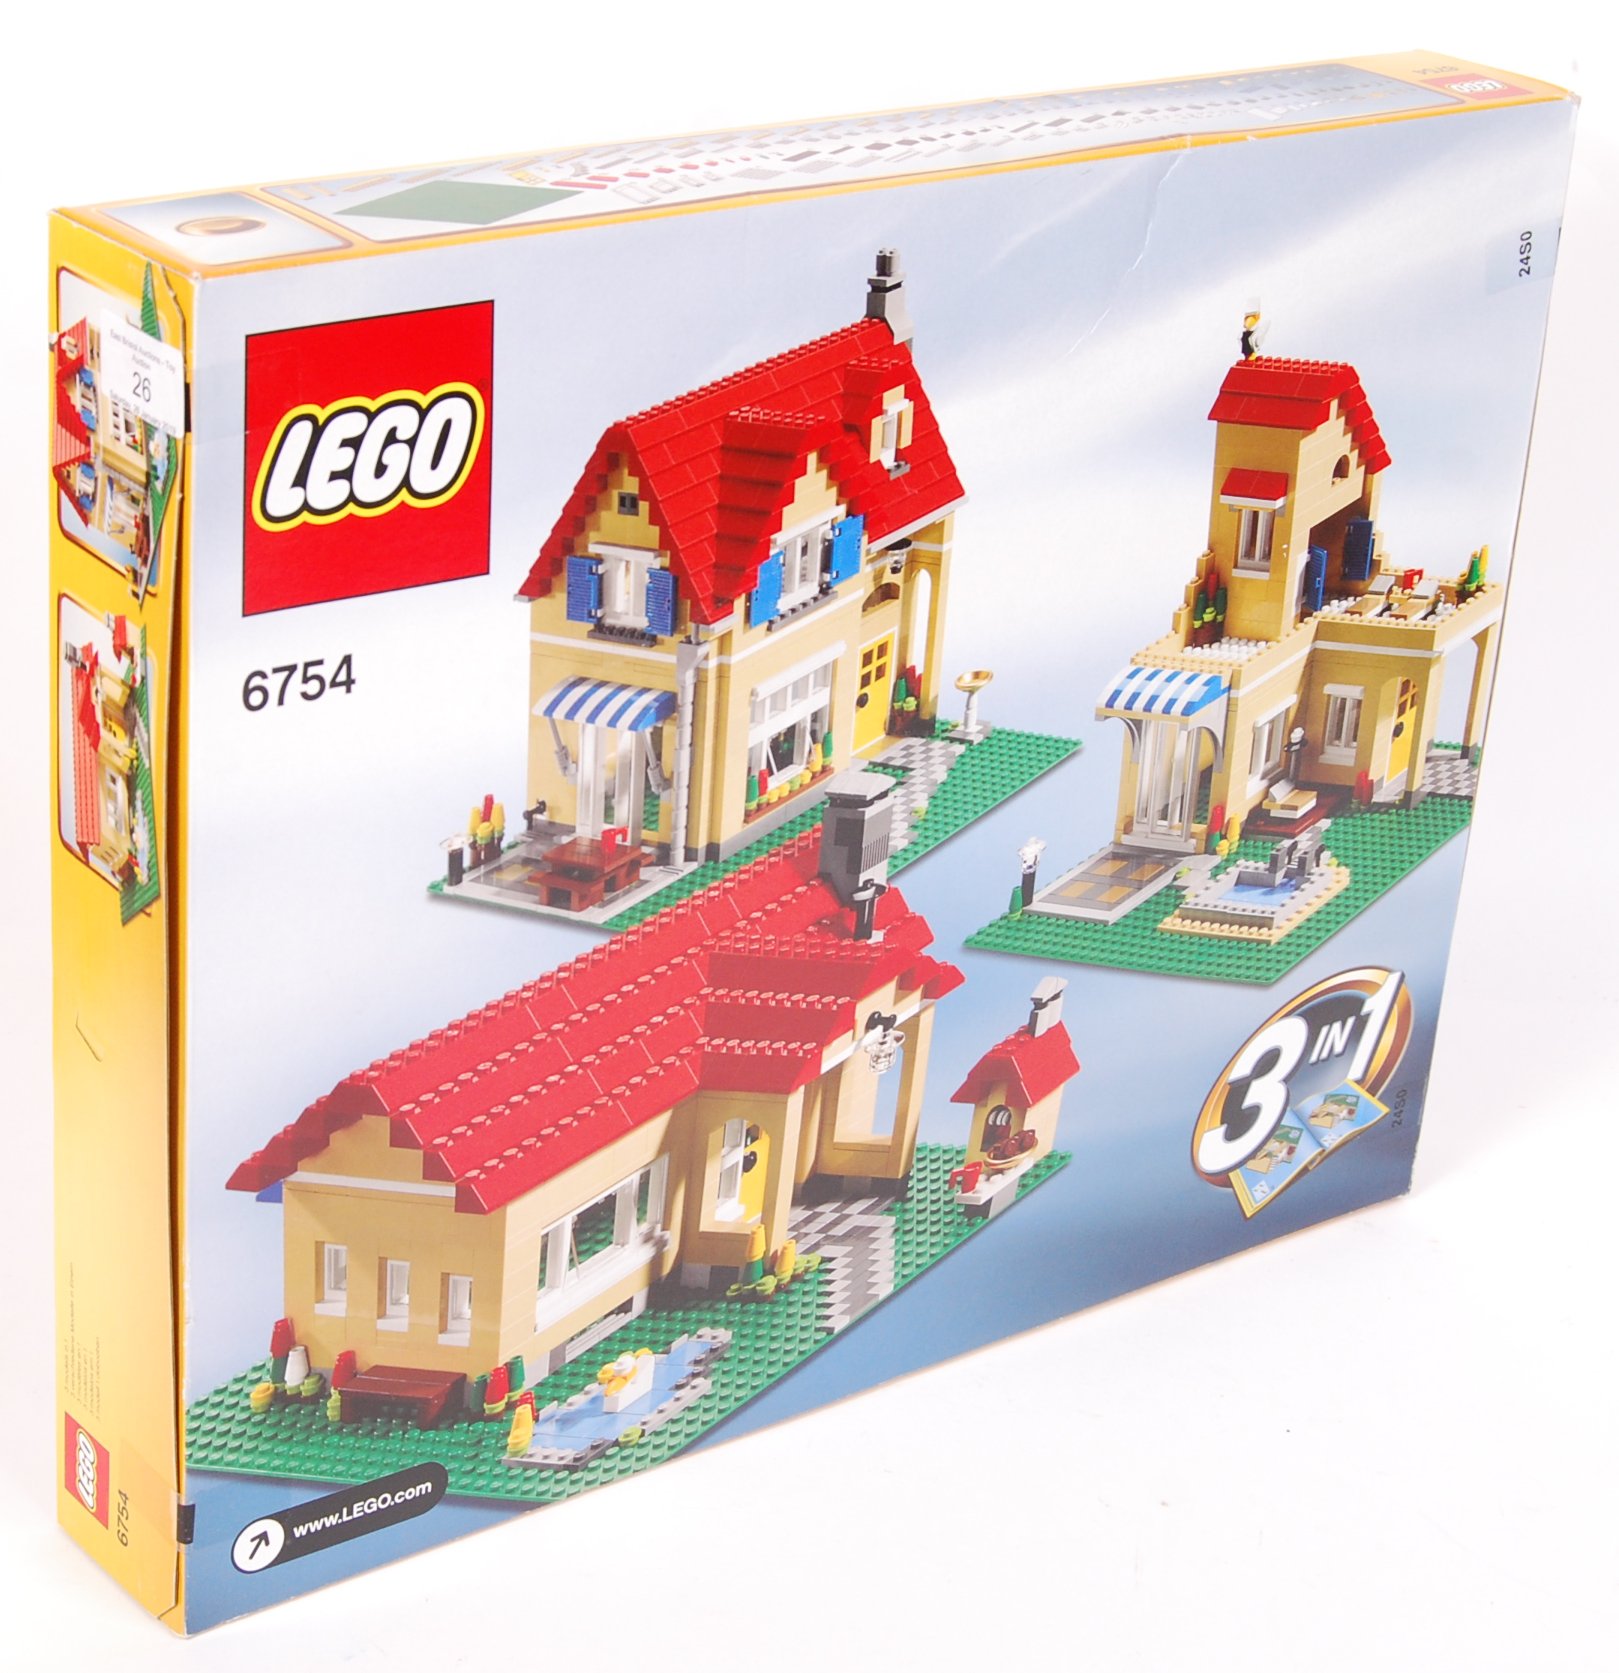 LEGO CREATOR SET 6754 ' 3 IN 1 FAMILY HOME ' SEALED - Image 2 of 2